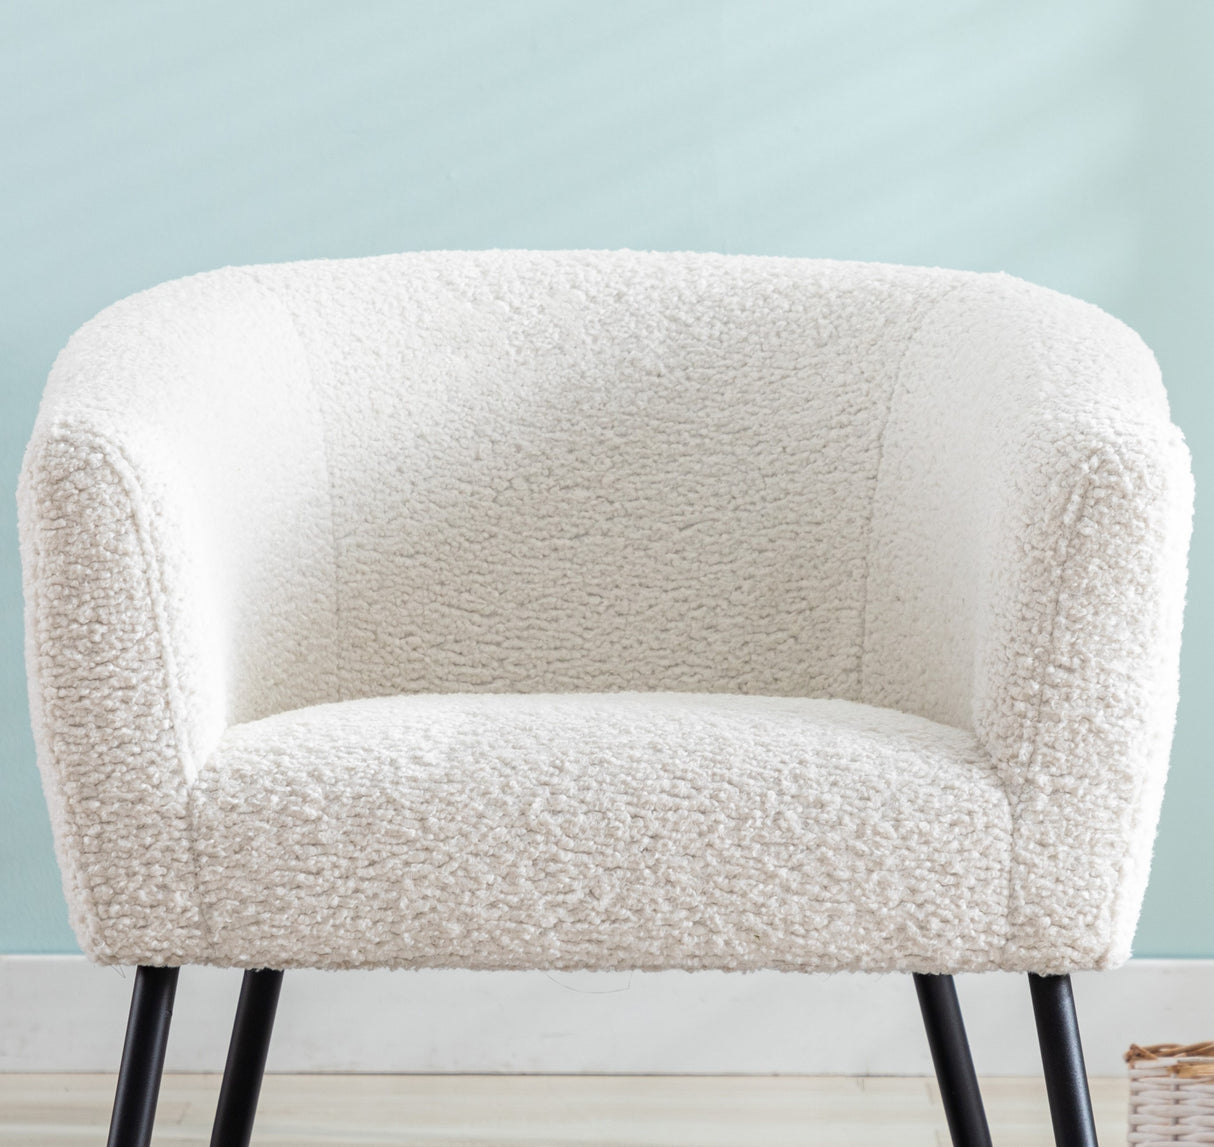 Modern Style 1pc Accent Chair White Sheep Wool-Like Fabric Covered Metal Legs Stylish Living Room Furniture - Home Elegance USA